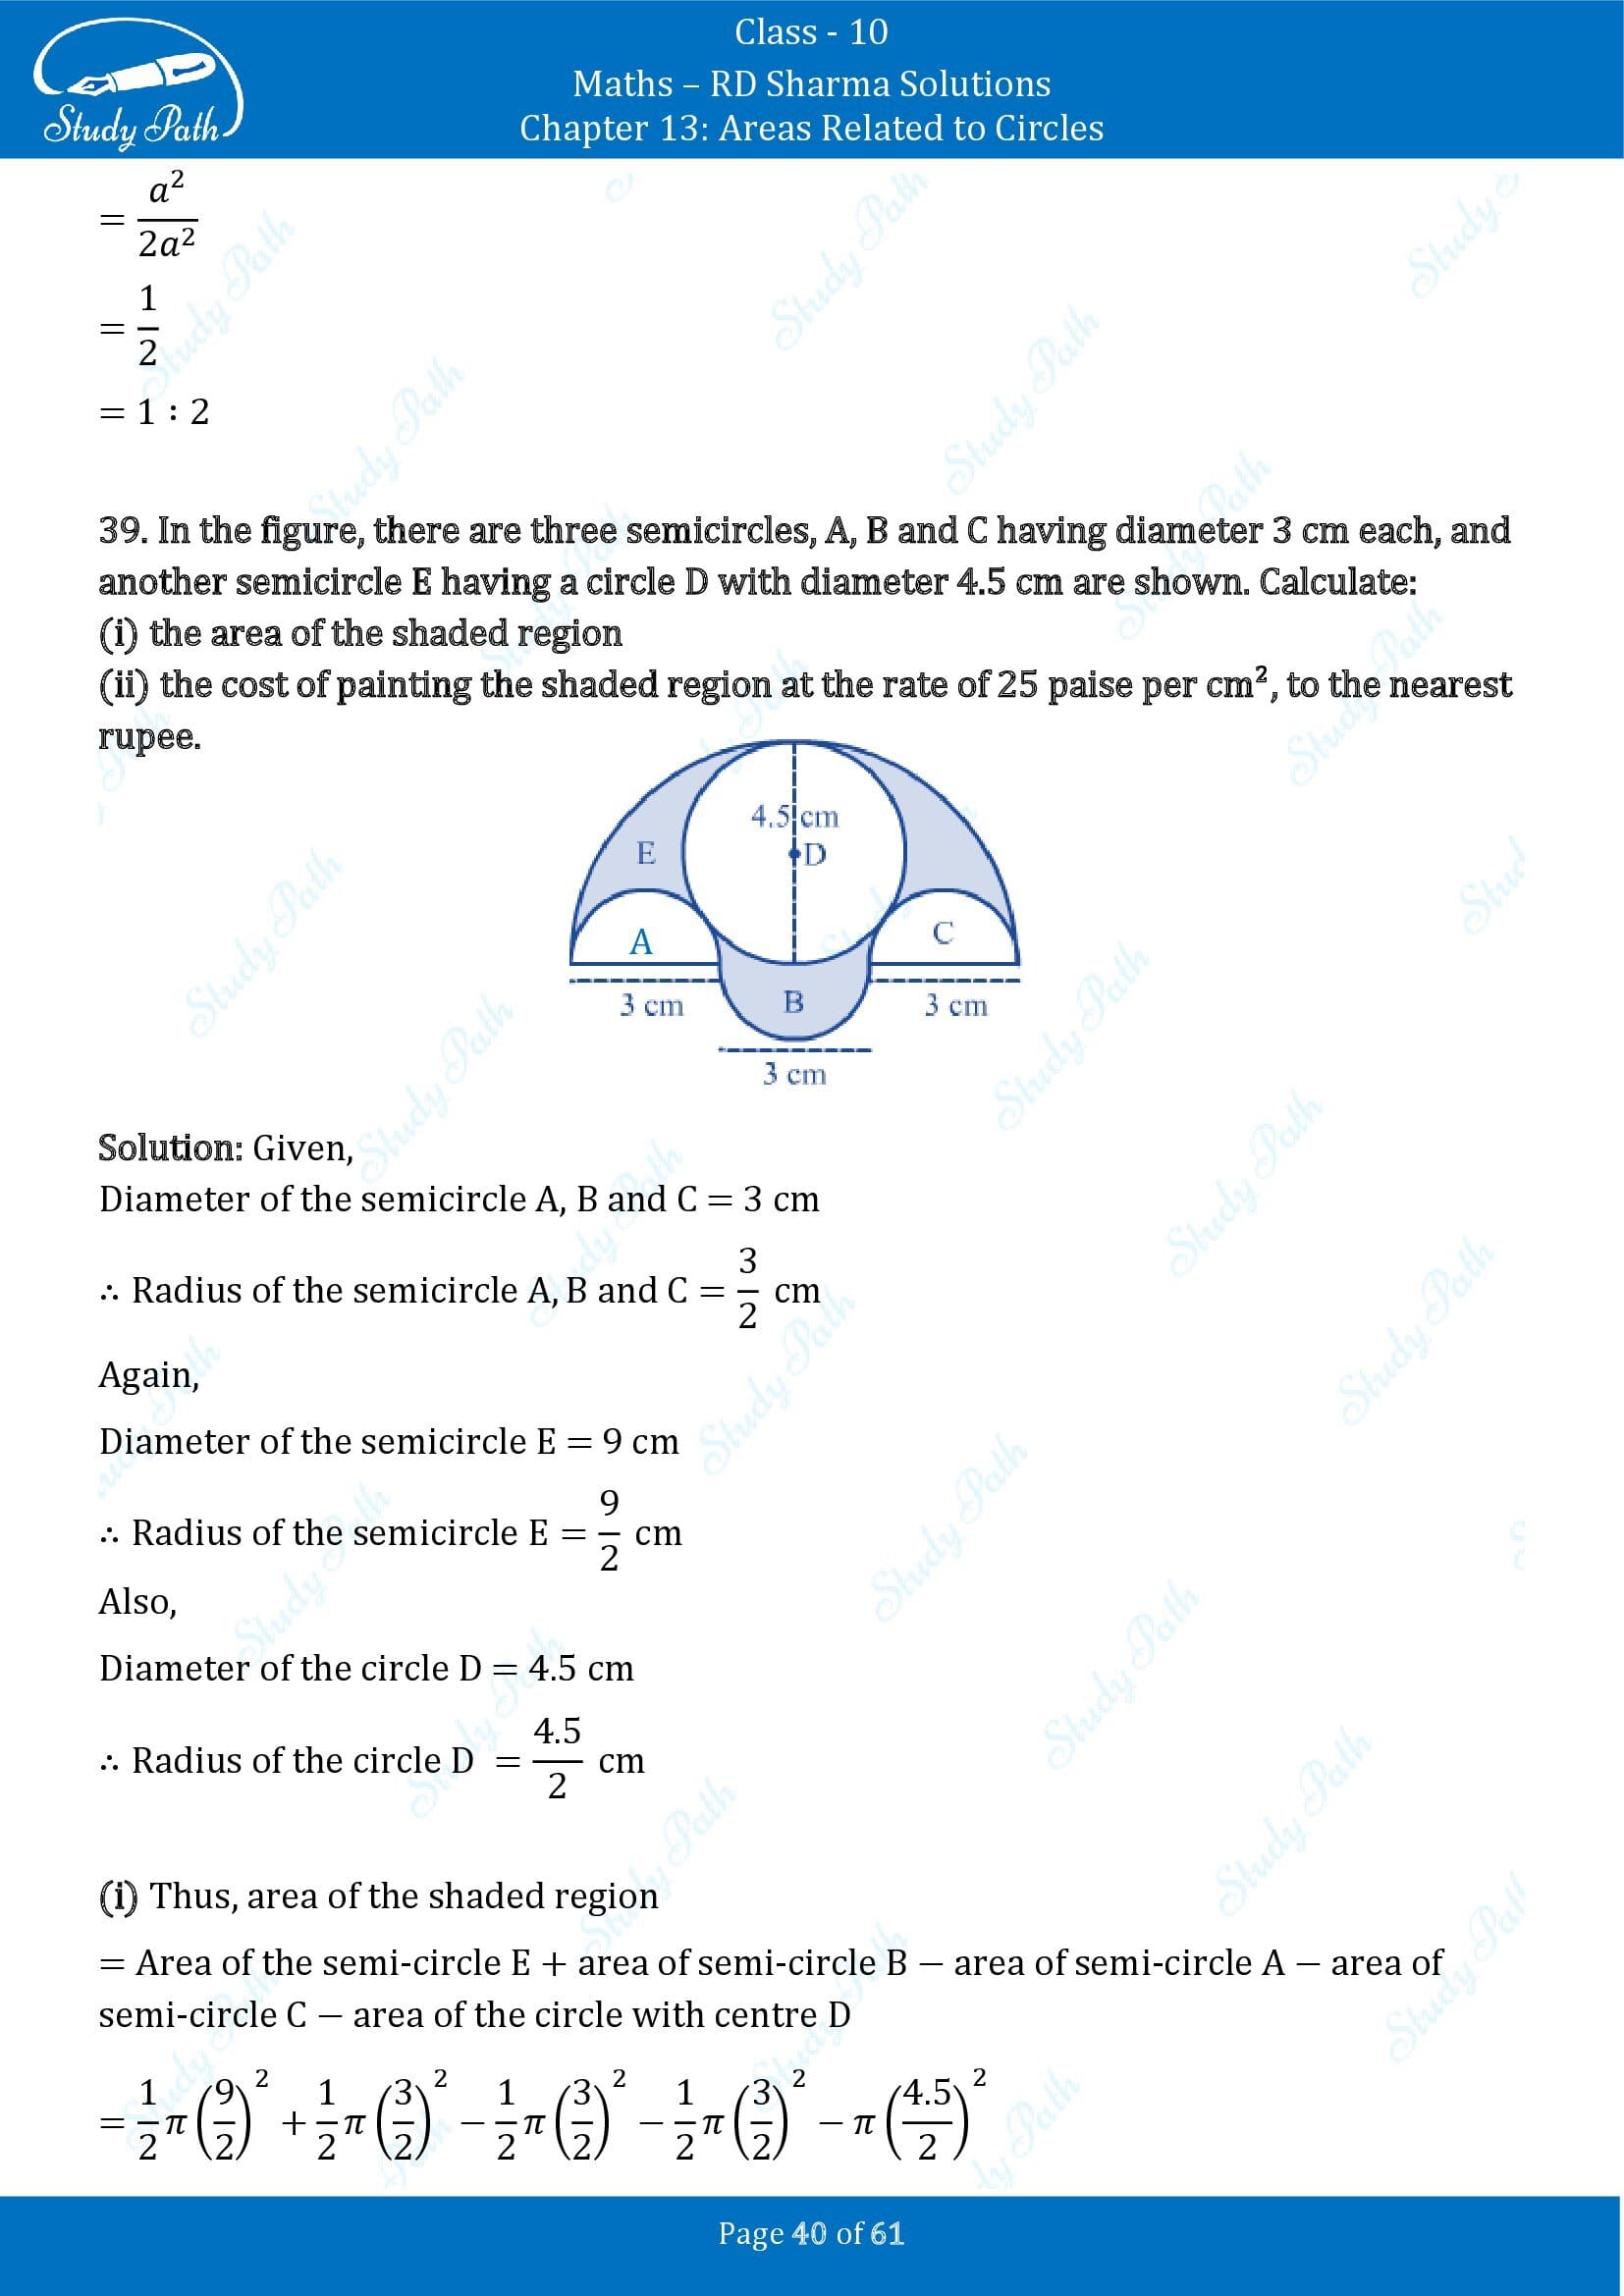 RD Sharma Solutions Class 10 Chapter 13 Areas Related to Circles Exercise 13.4 00040